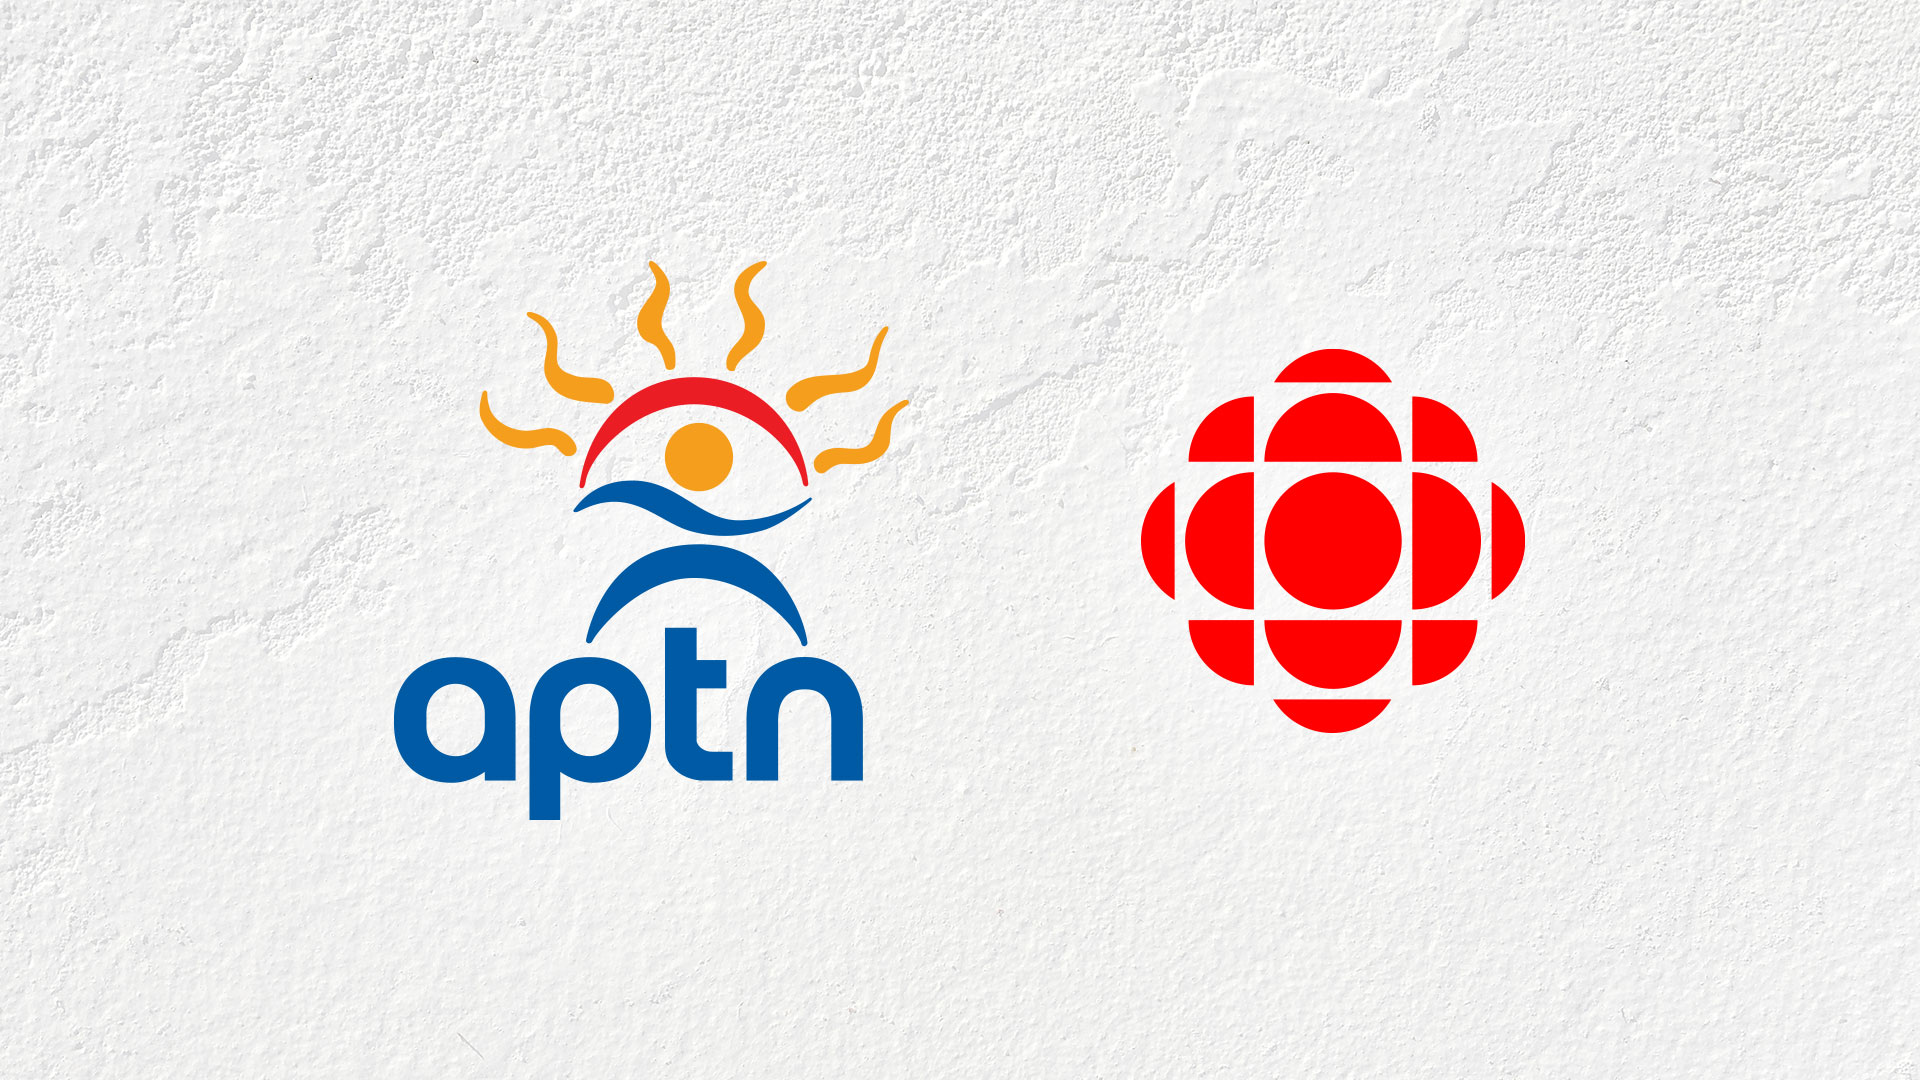 Logos of APTN and CBC/Radio-Canada on a white background.